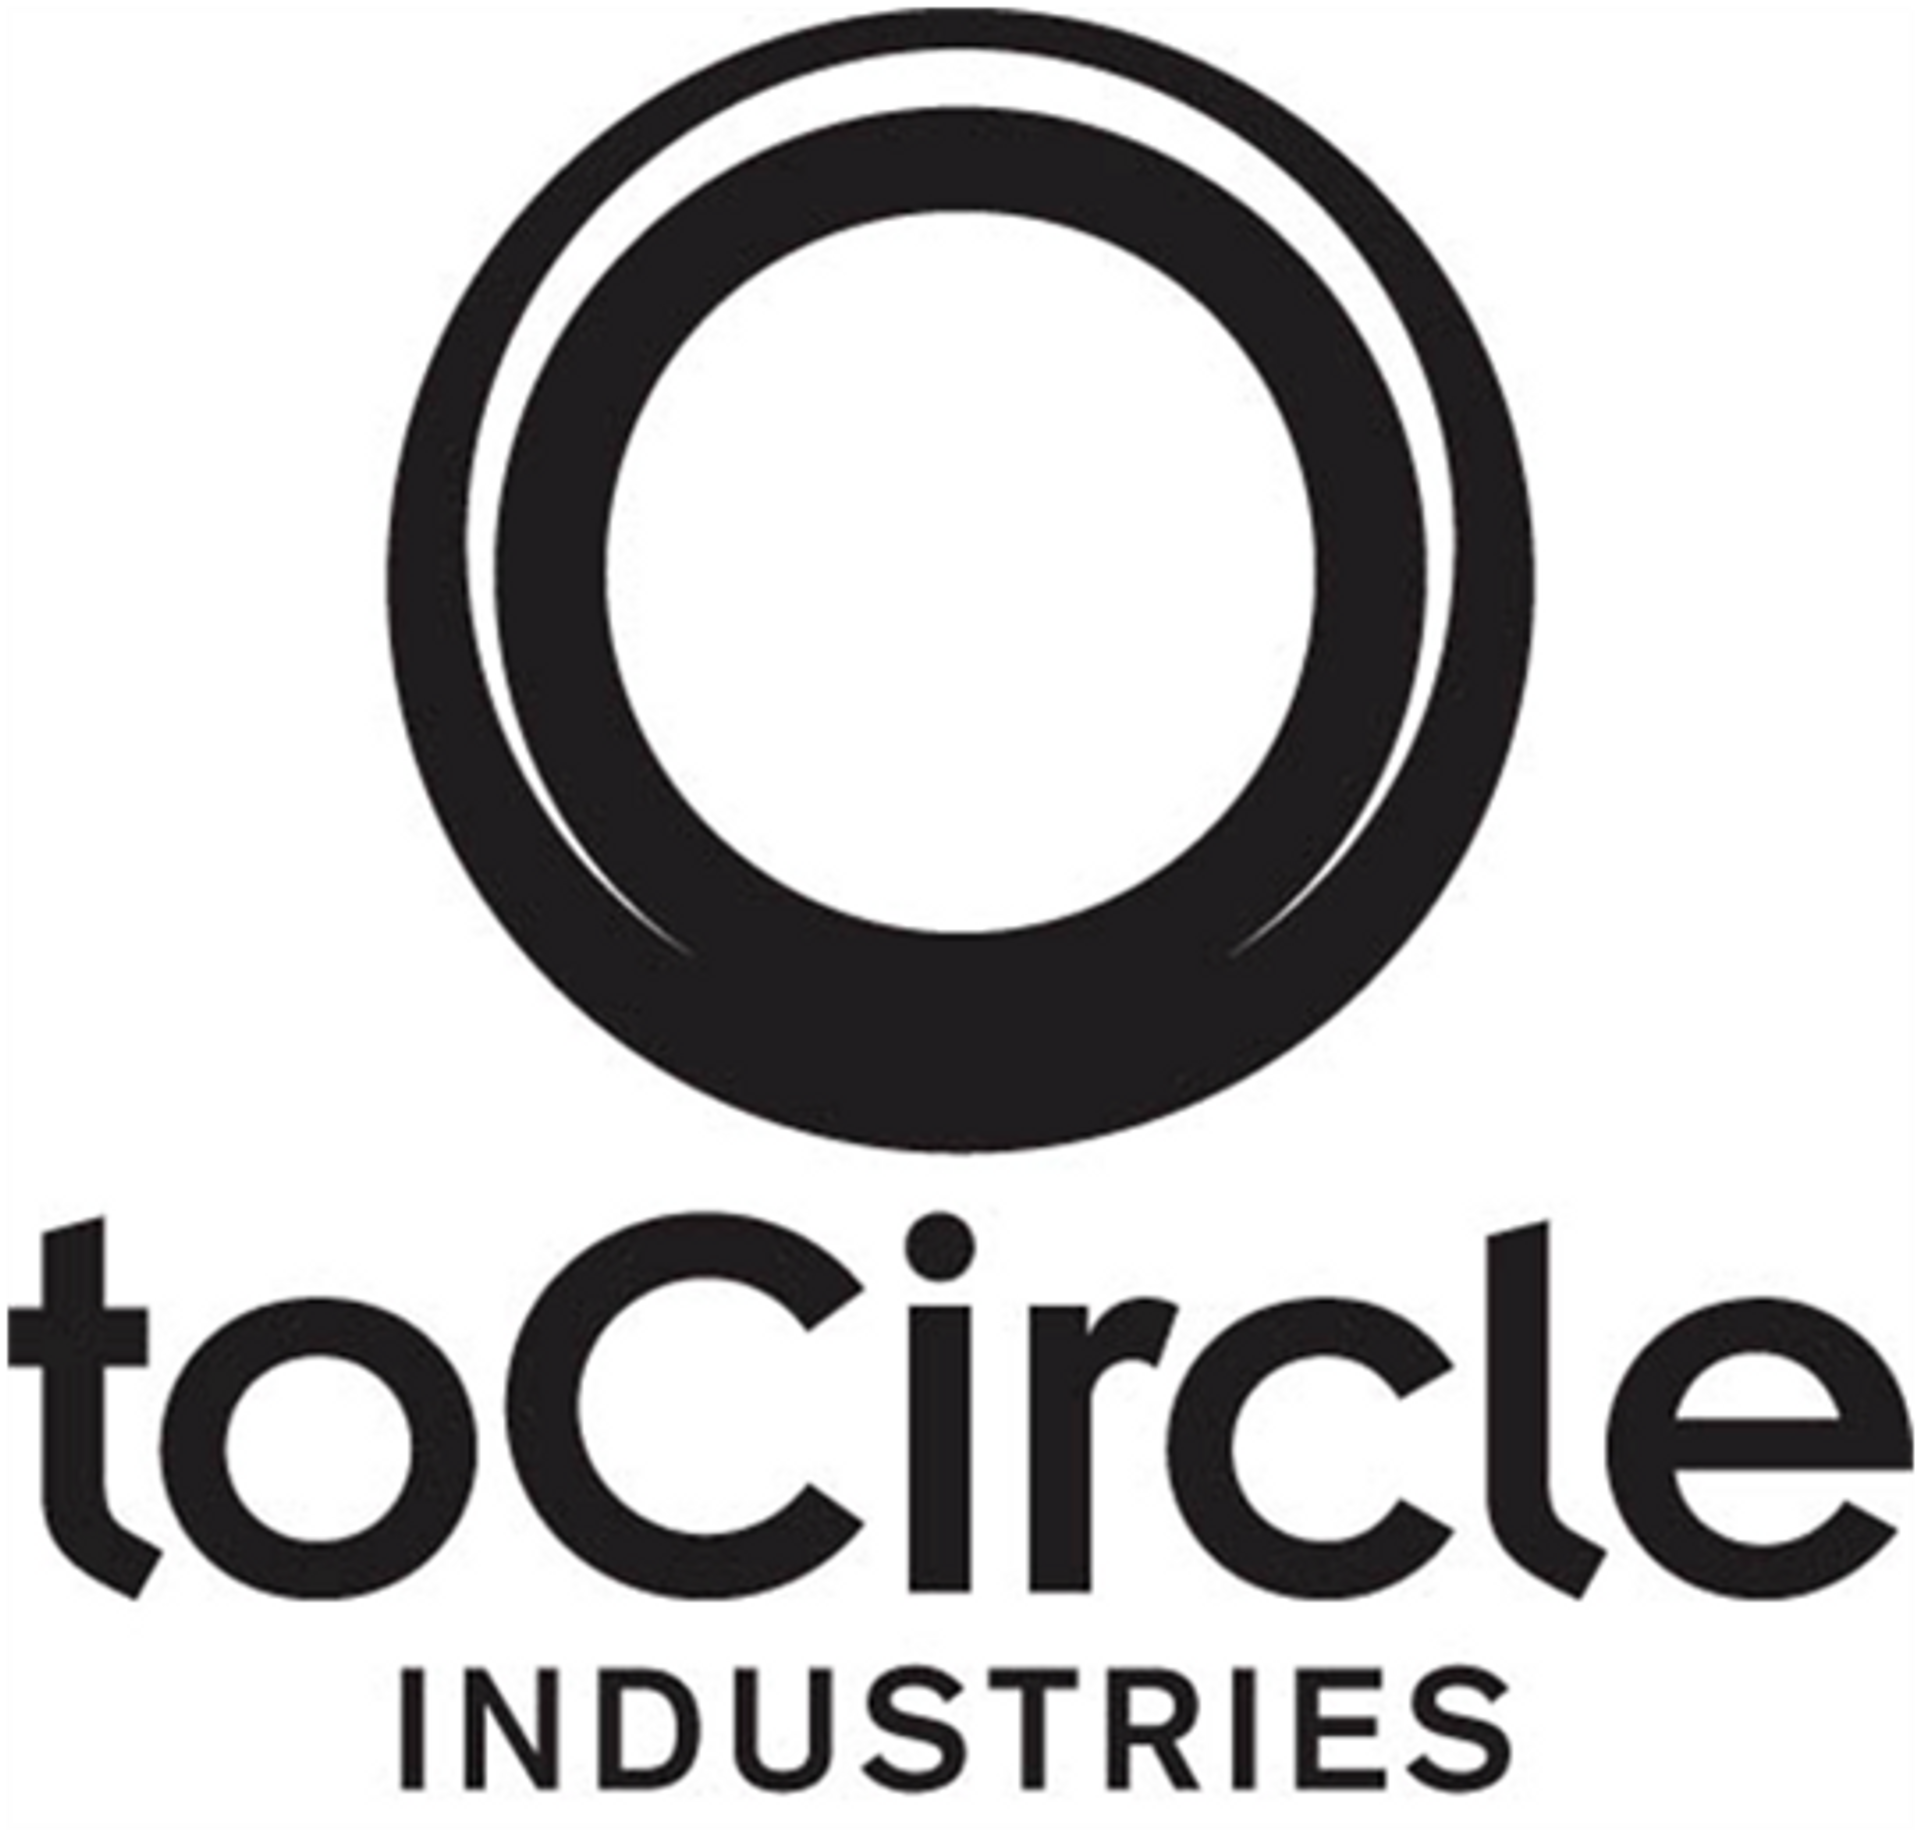 TOCIRCLE INDUSTRIES AS